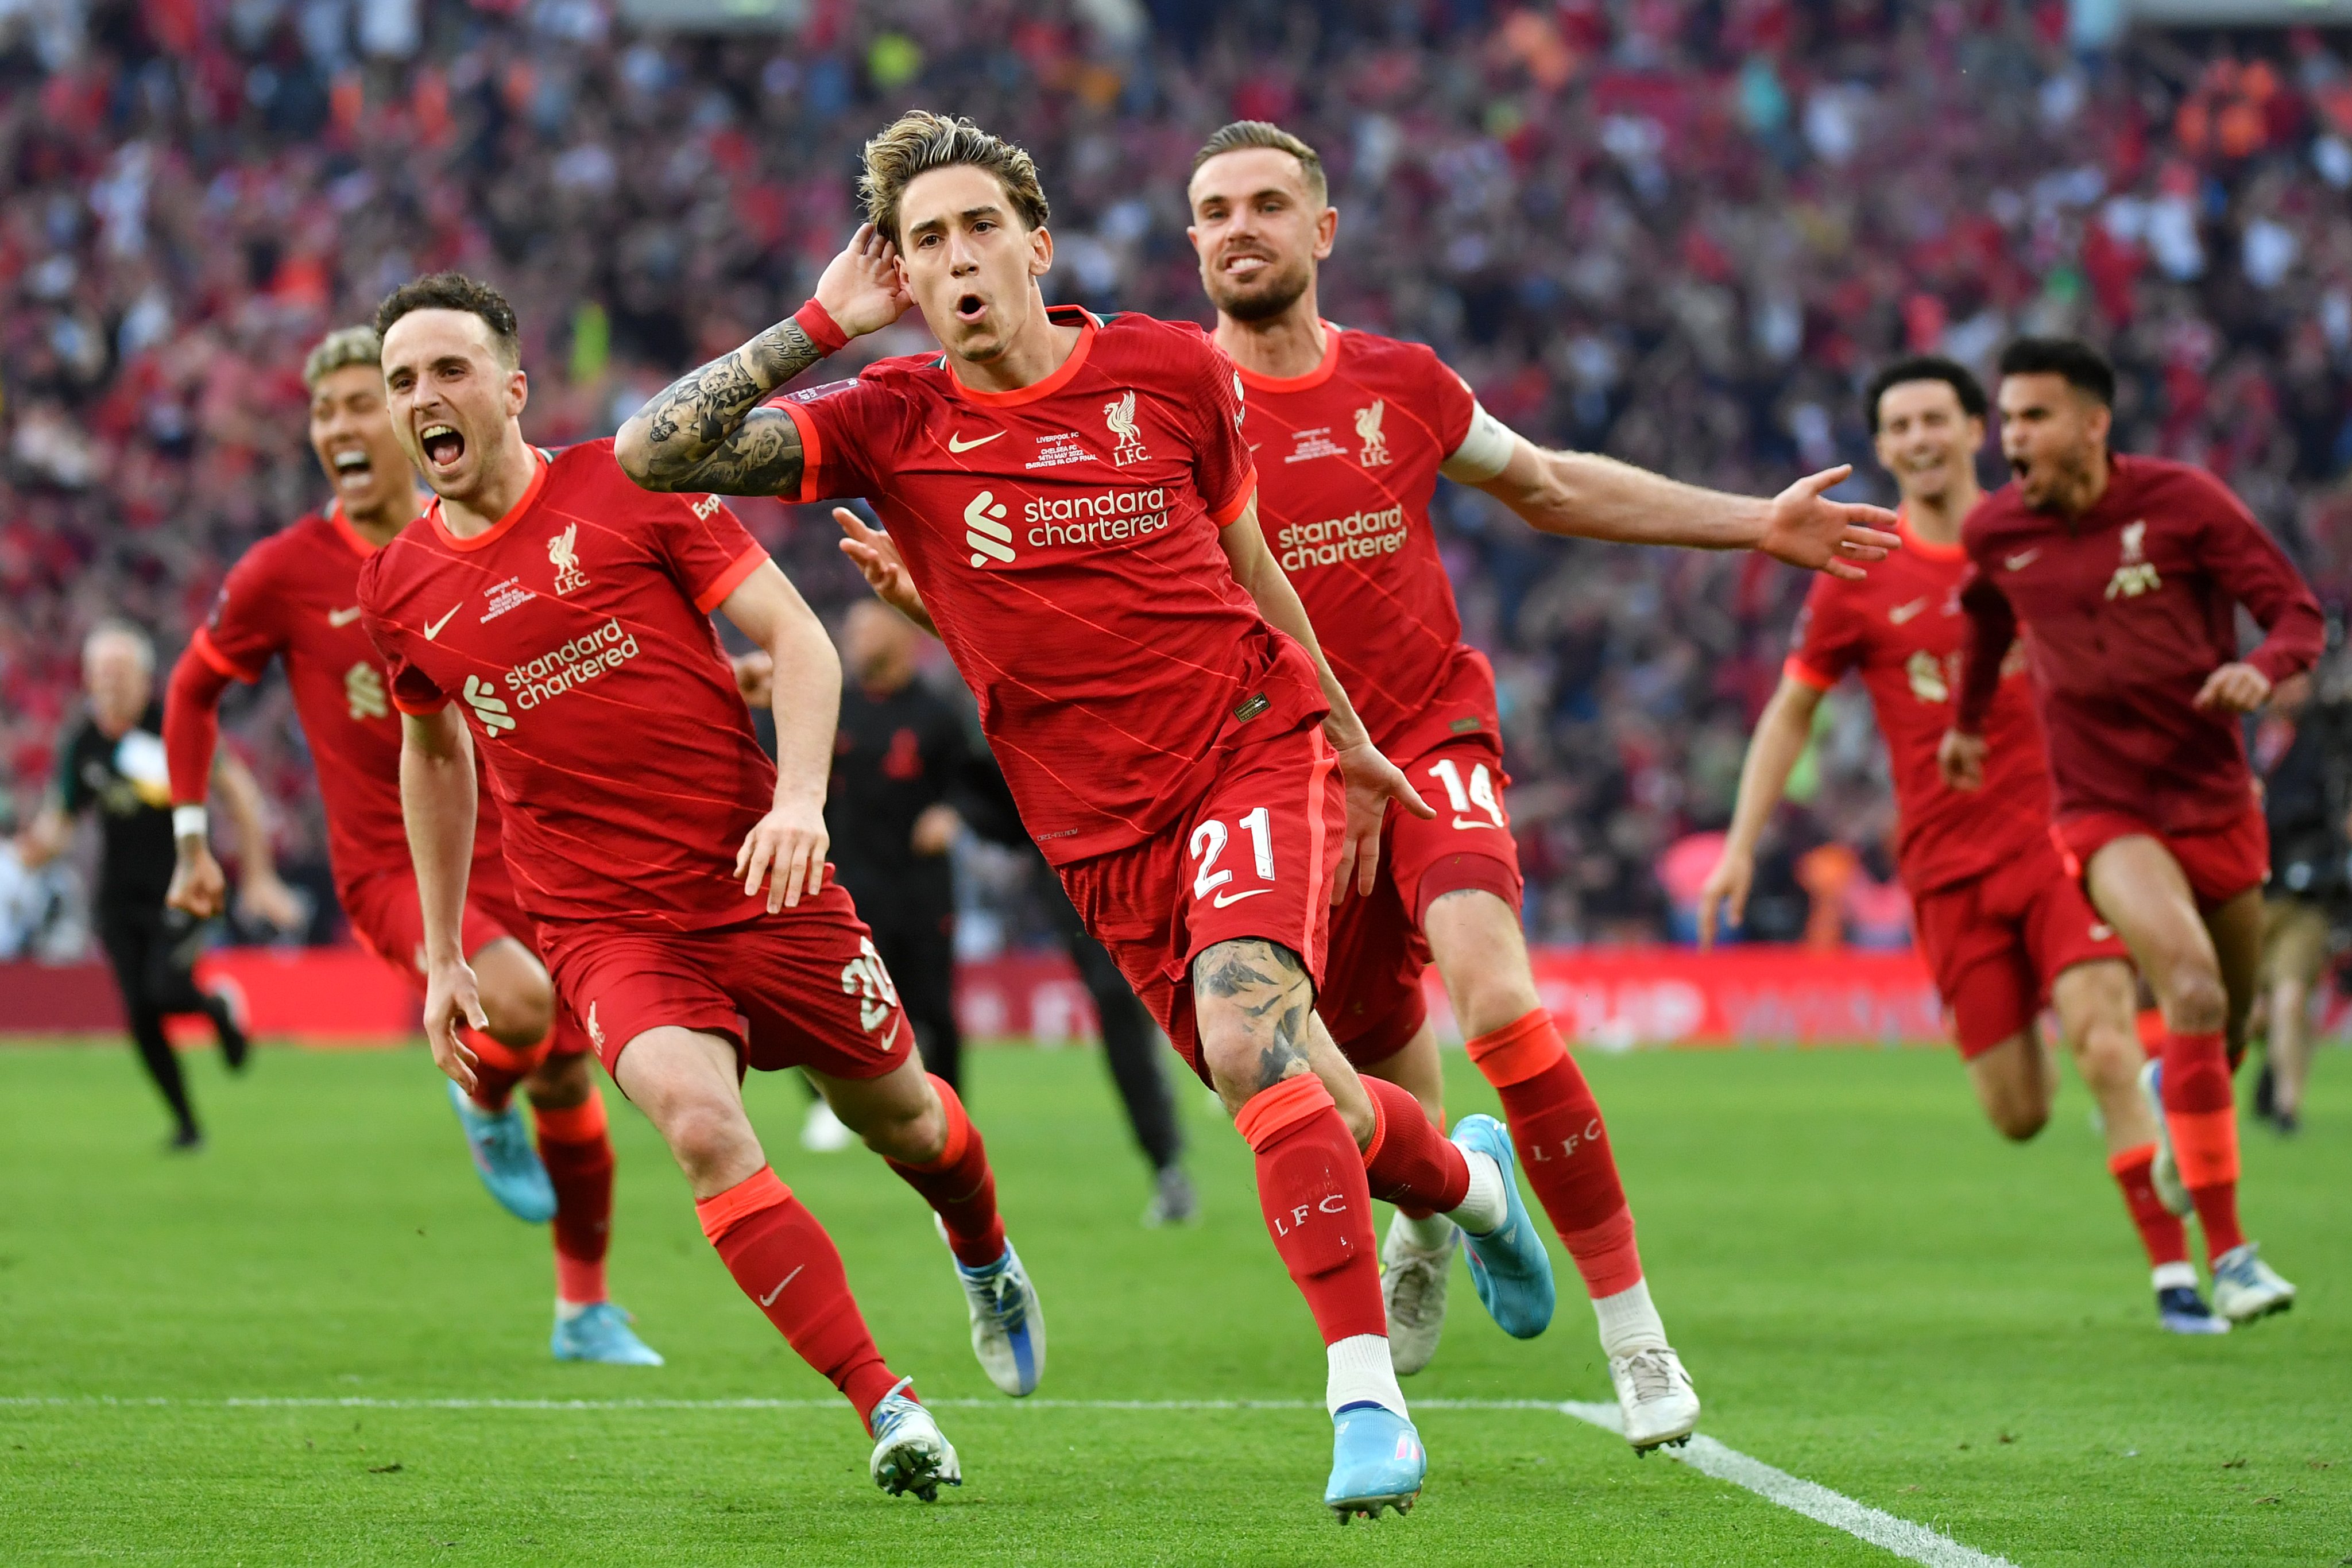 UEFA Champions League Final 2022: TREBLE Dreaming Reds on course to upset Real's record-breaking 14 European title hopes, Follow Liverpool vs Real Madrid LIVE Streaming: Team News, Match Preview